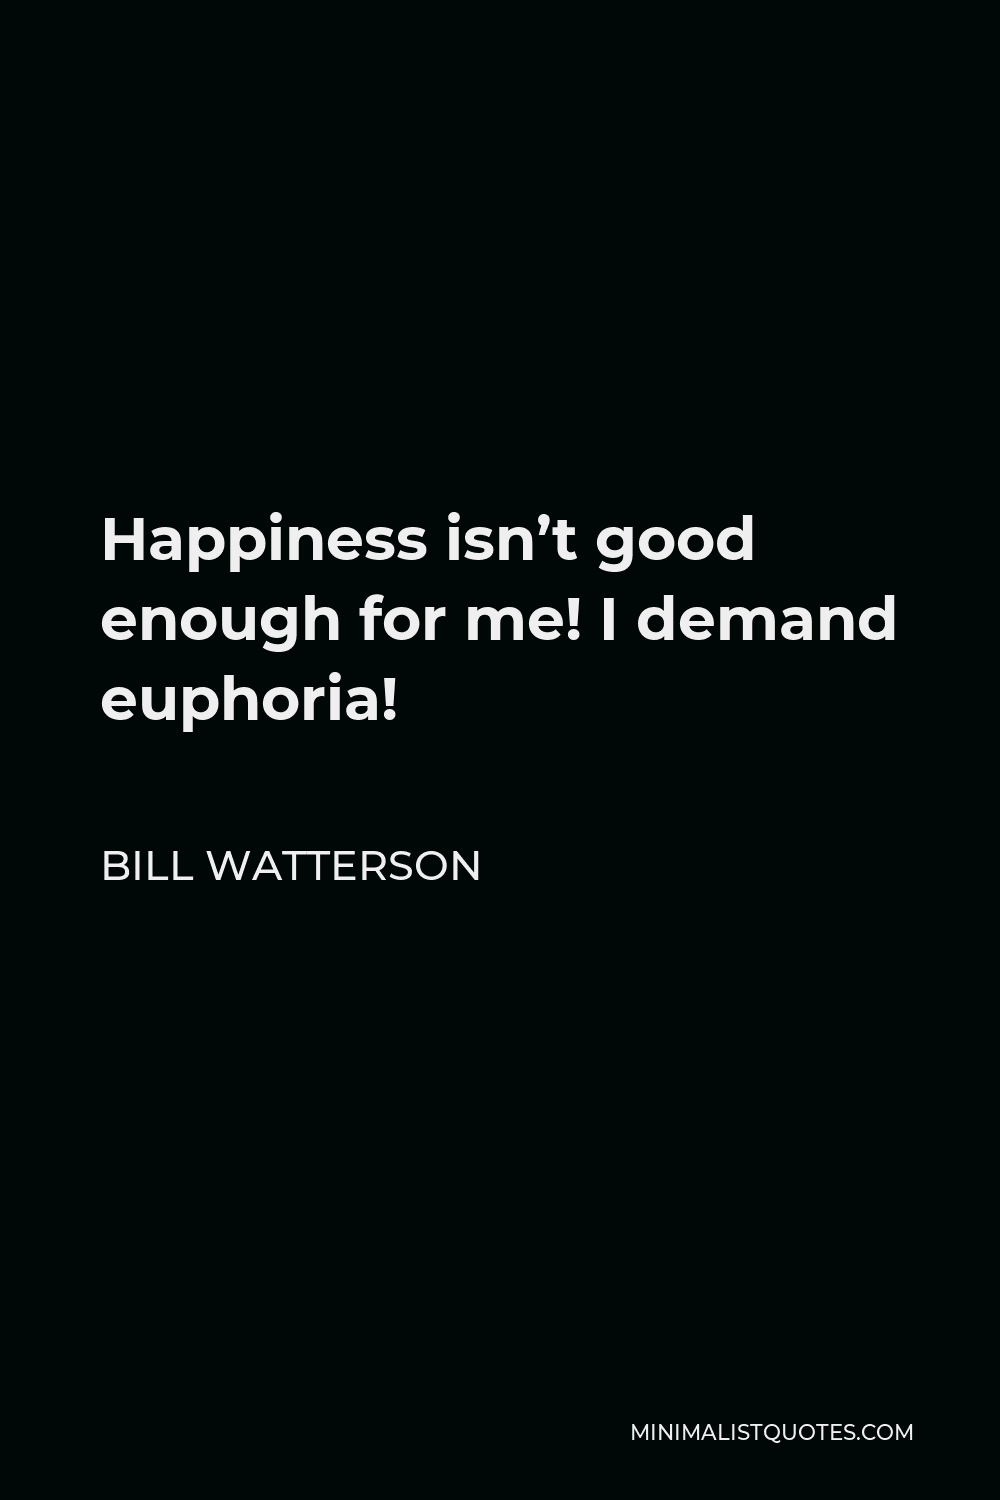 Bill Watterson Quote - Happiness isn’t good enough for me! I demand euphoria!